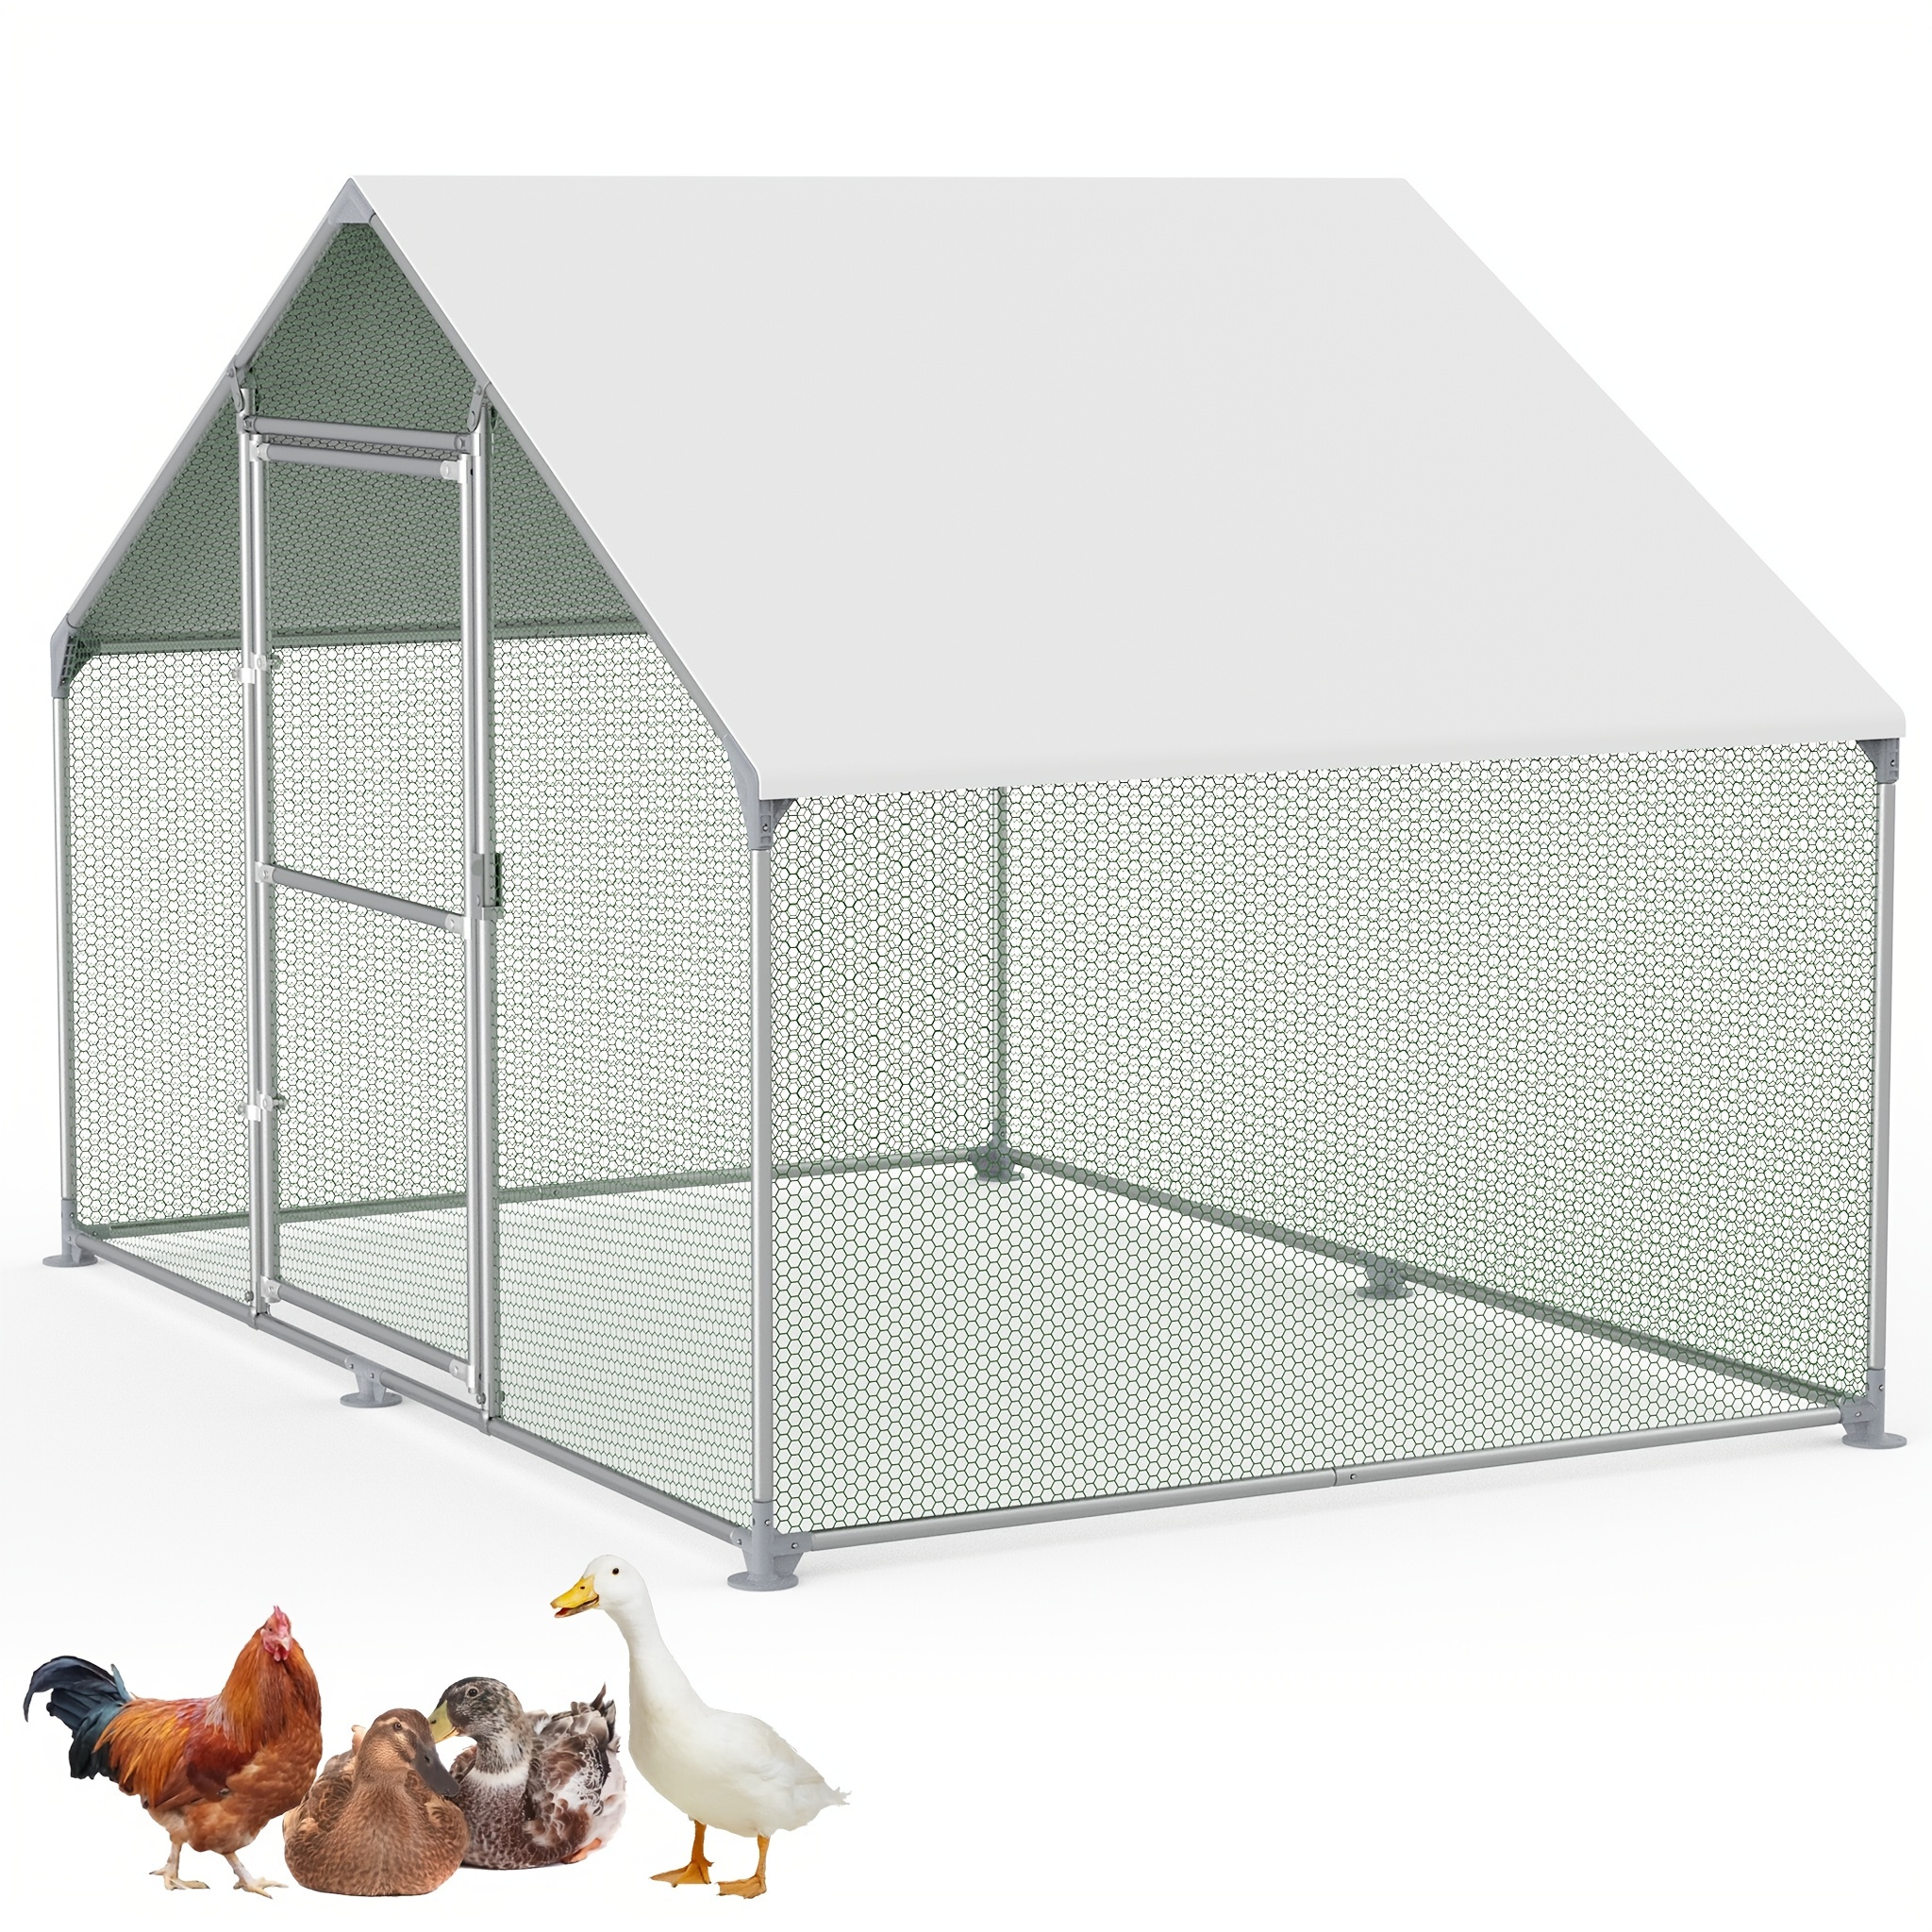 

Yardin Chicken Coop Small Animal Hutch Outdoor Enclosure Galvanised Steel Poultry House With Pe Sun Protection Roof And Lock Weatherproof Cage For Chicken, Bird, Small Animals, Pet